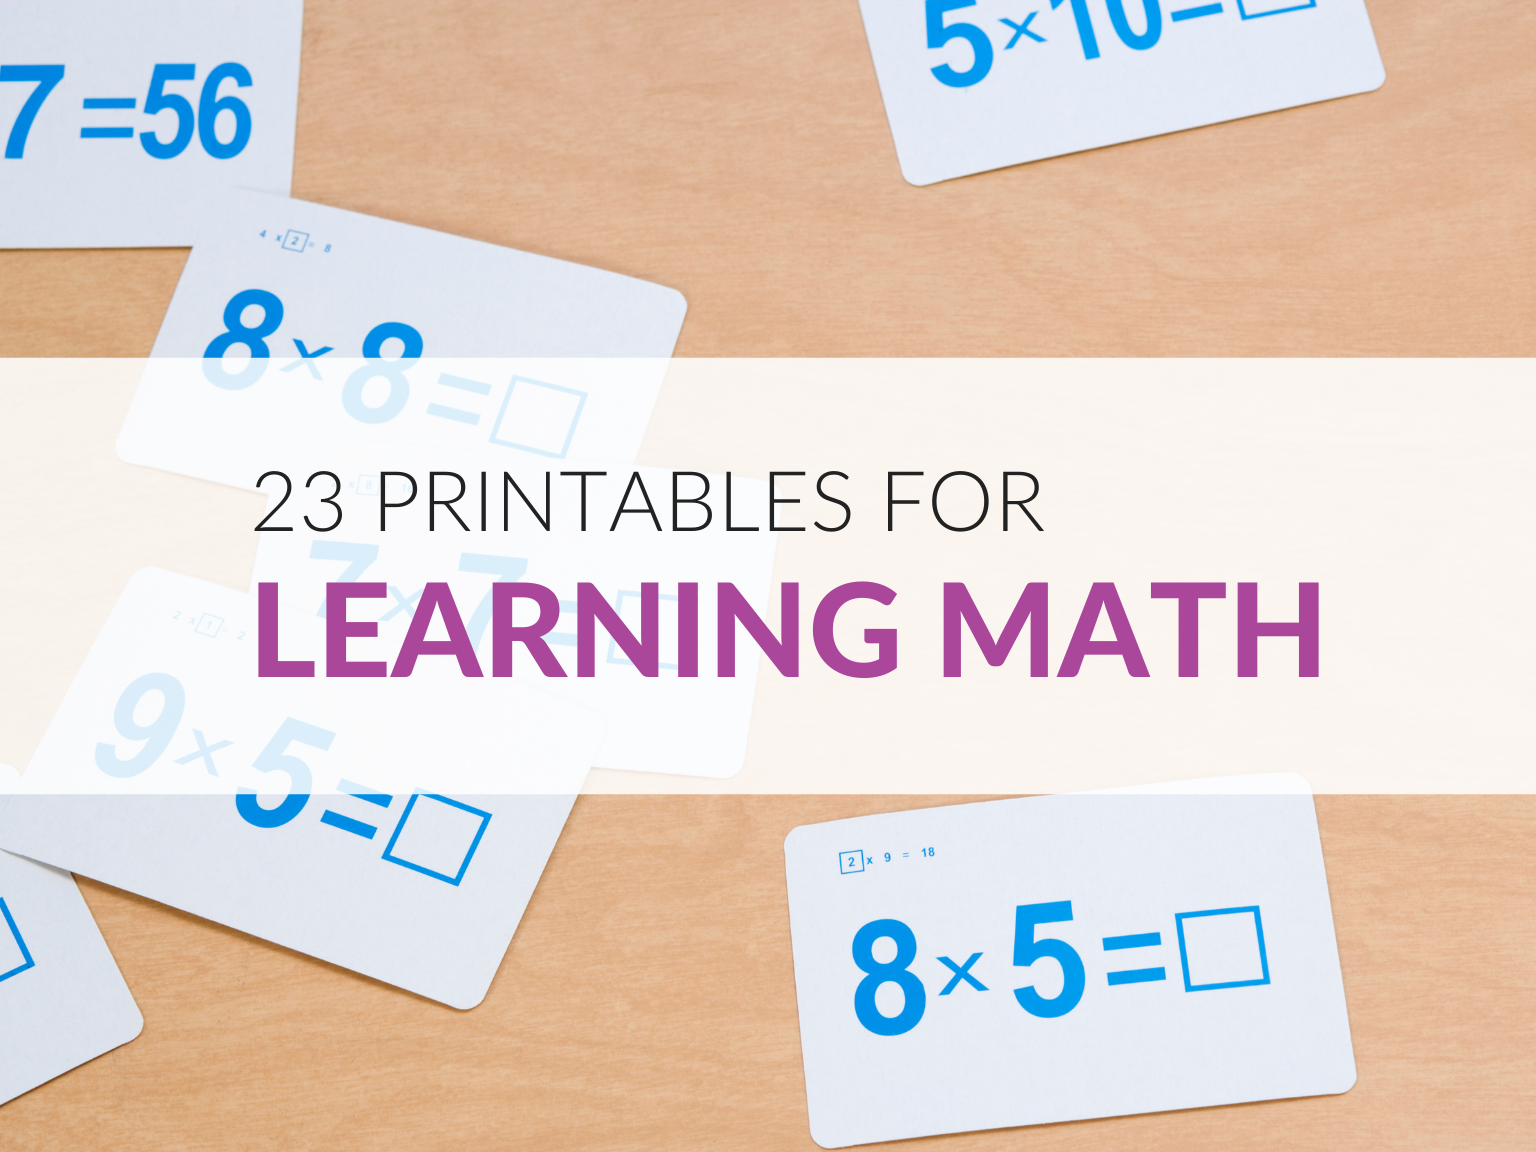 23 printables for learning math